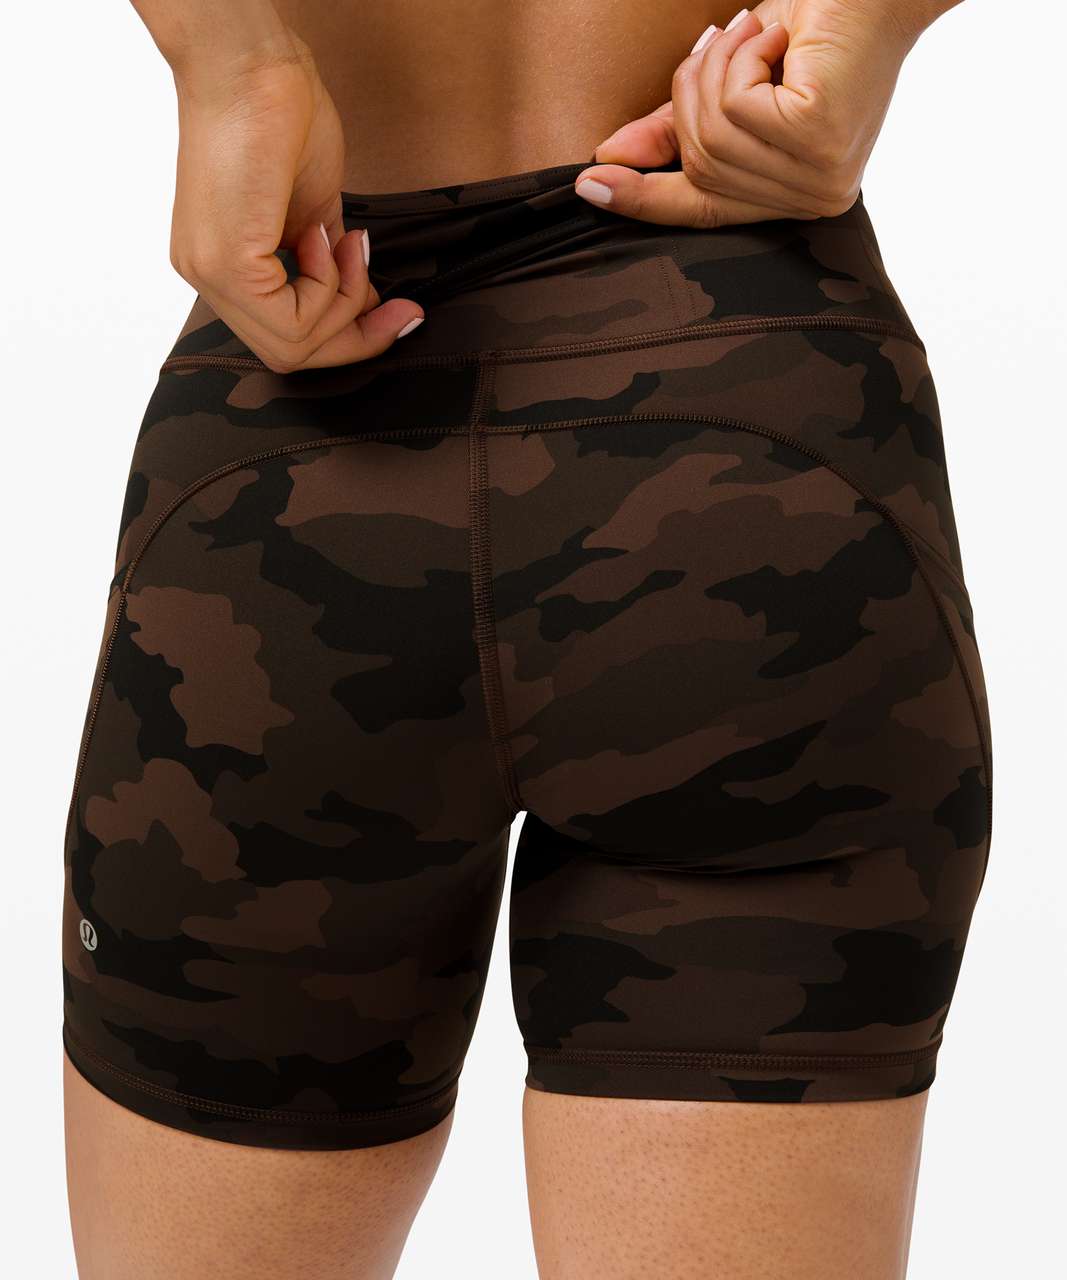 Lululemon Fast and Free Short 6" *Non-Reflective - Heritage 365 Camo Brown Earth Multi